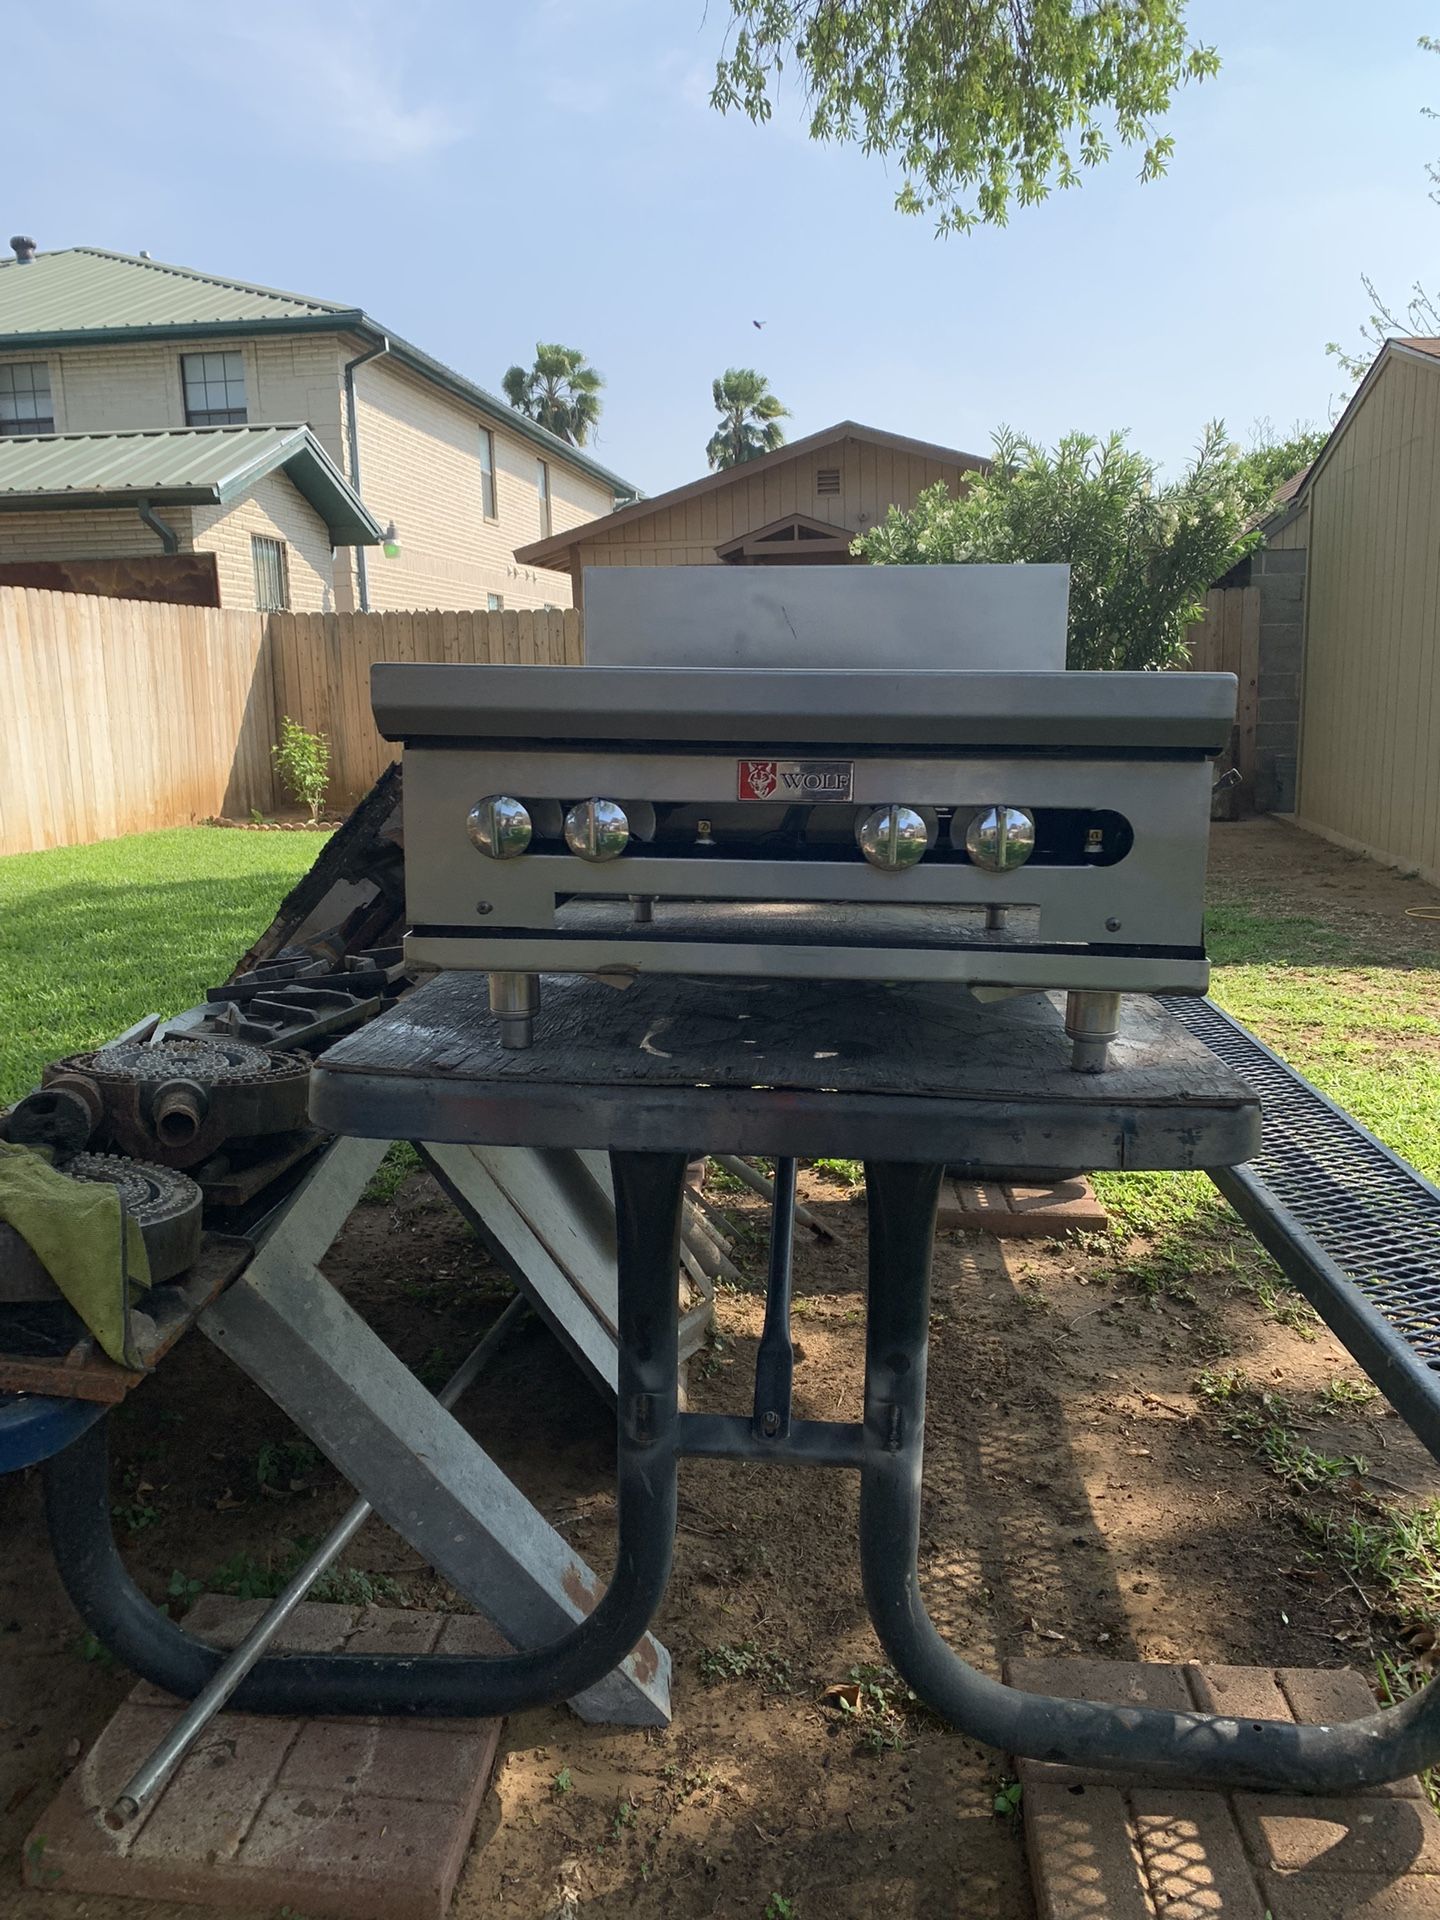 24 Inch Four Burner Commercial Stove(Hot Plate) Gas/Lp whatever You Want It Could Be Converted